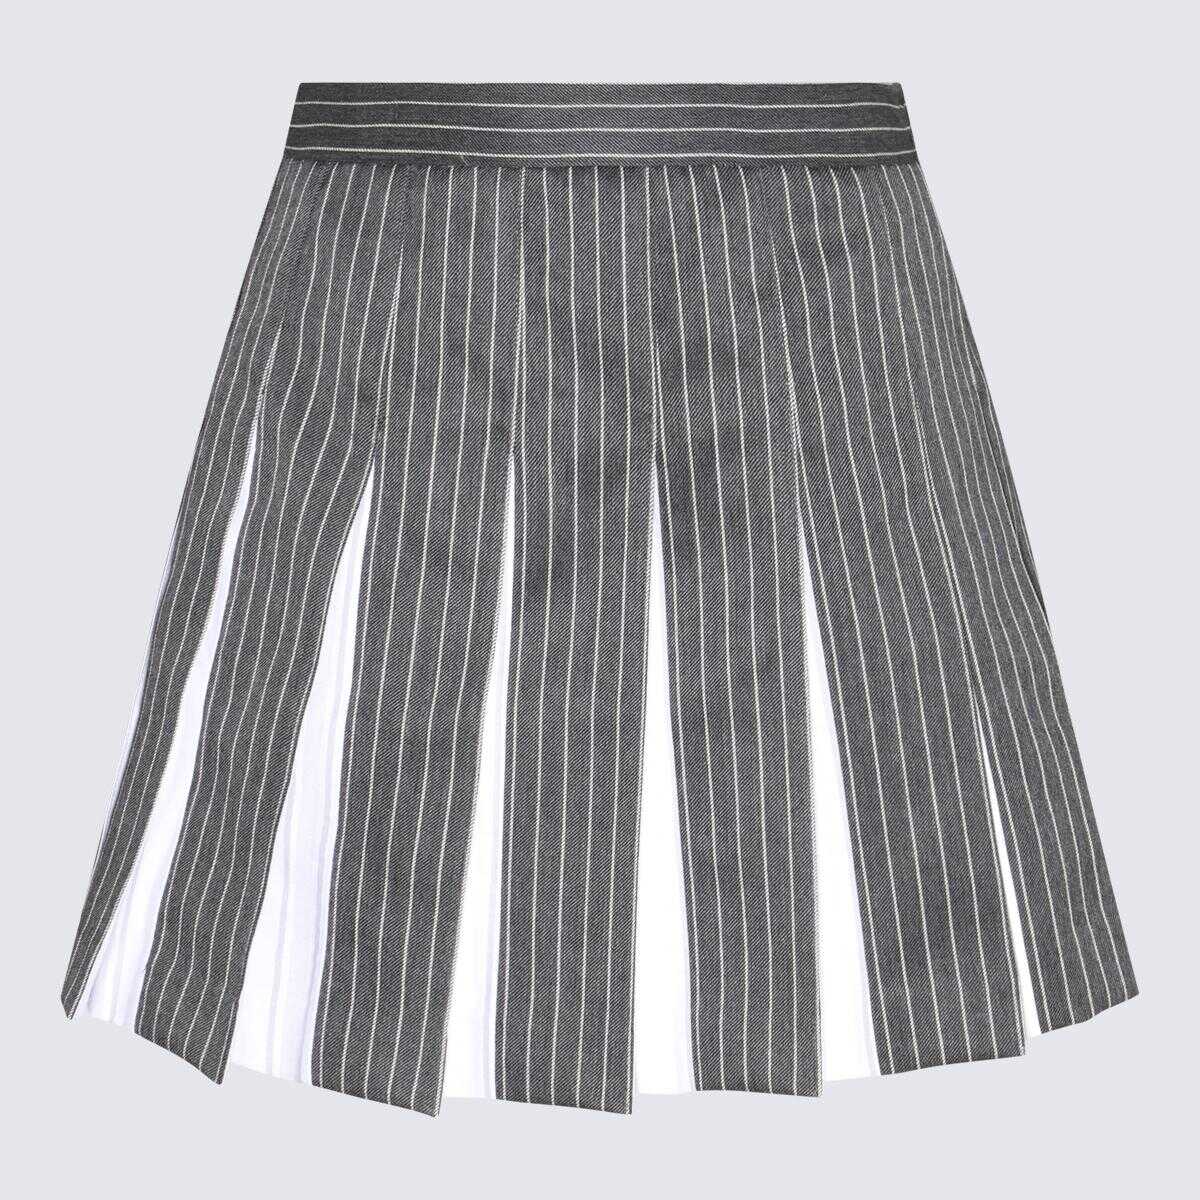 Poze Thom Browne THOM BROWNE GREY AND WHITE COTTON-WOOL BLEND SKIRT MED GREY b-mall.ro 